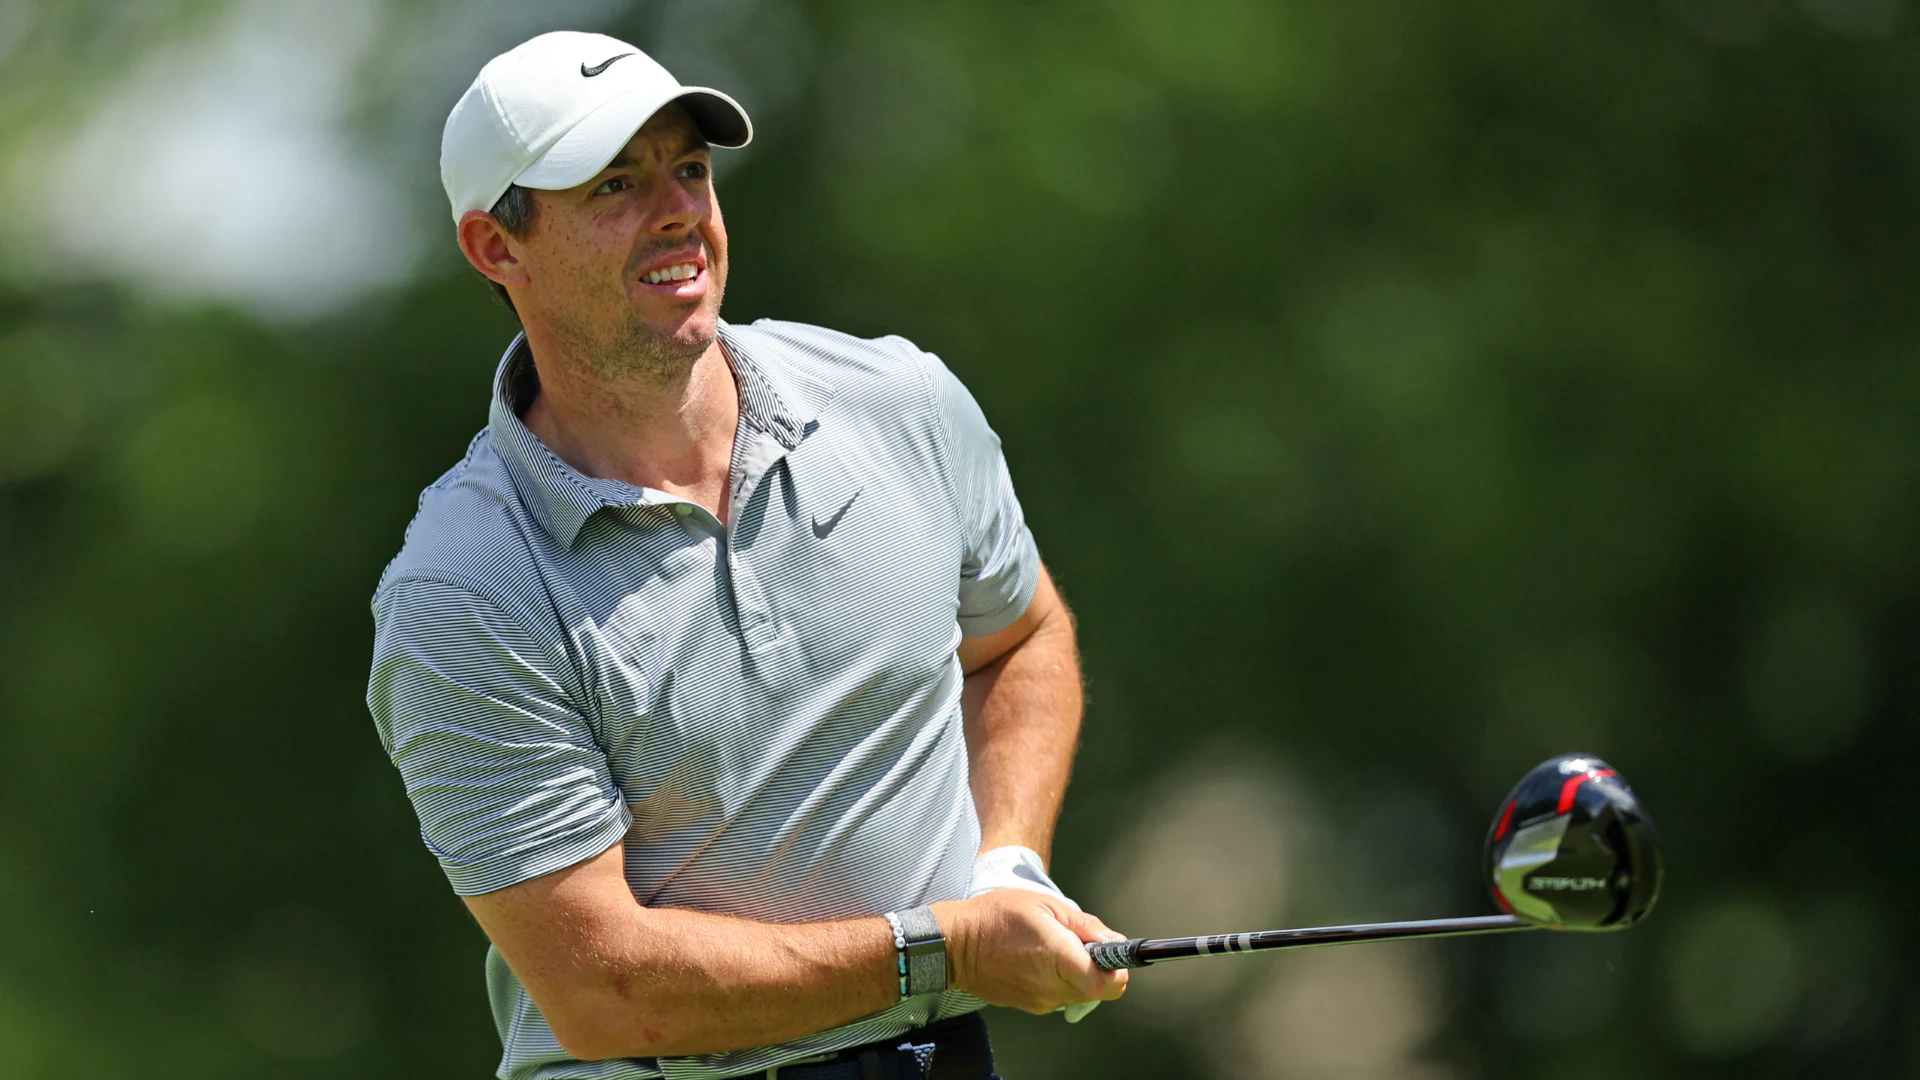 Rory McIlroy continues heater and takes Travelers Championship lead, fighting fatigue, sickness